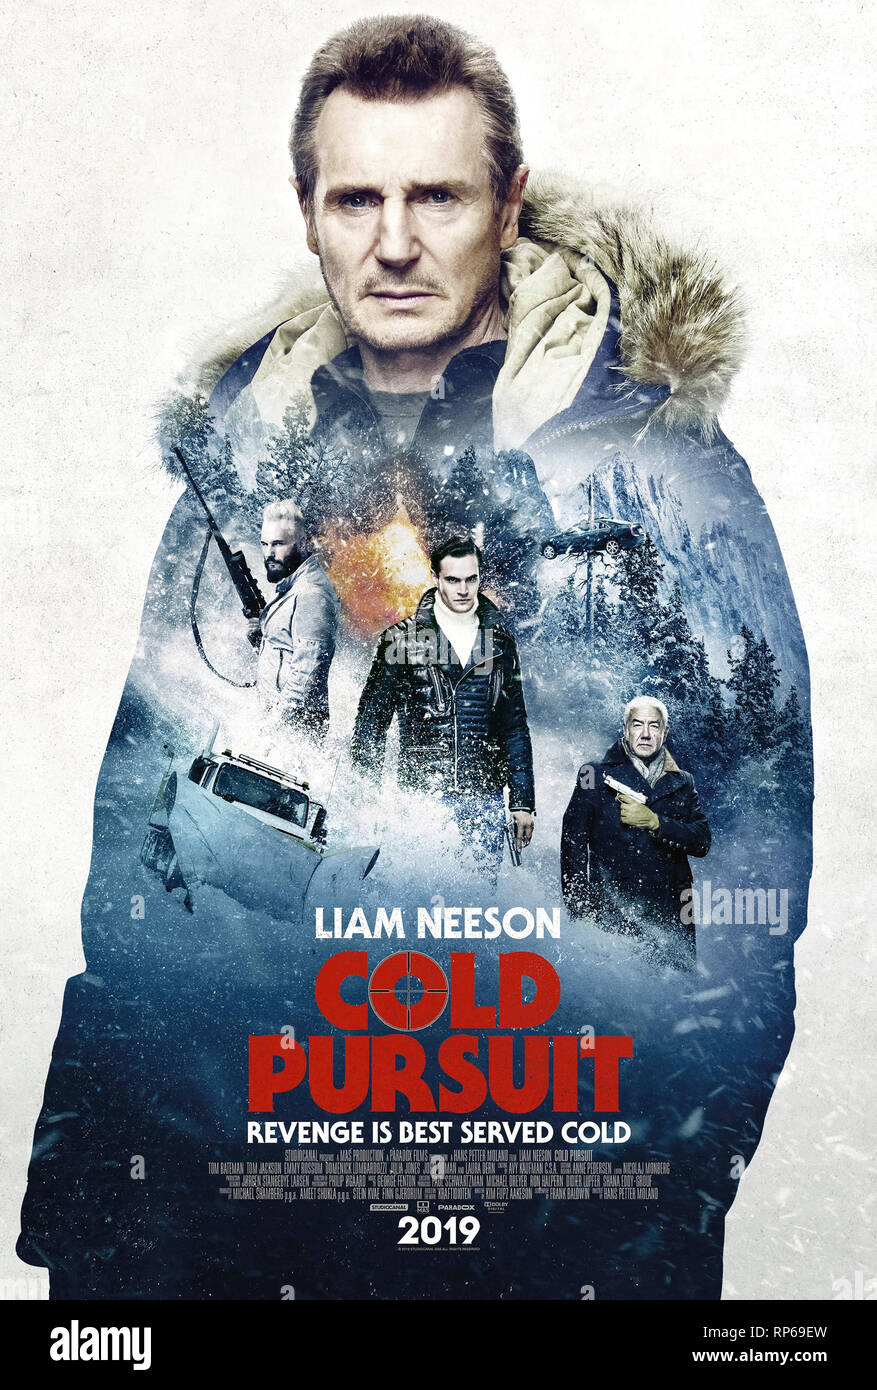 Cold Pursuit (2019) directed by Hans Petter Moland and starring Liam Neeson, Laura Dern and Micheál Richardson. Remake of the Norwegian film Kraftidioten; a snowplow drives takes vengeance on the drug lord who murdered his son. Stock Photo